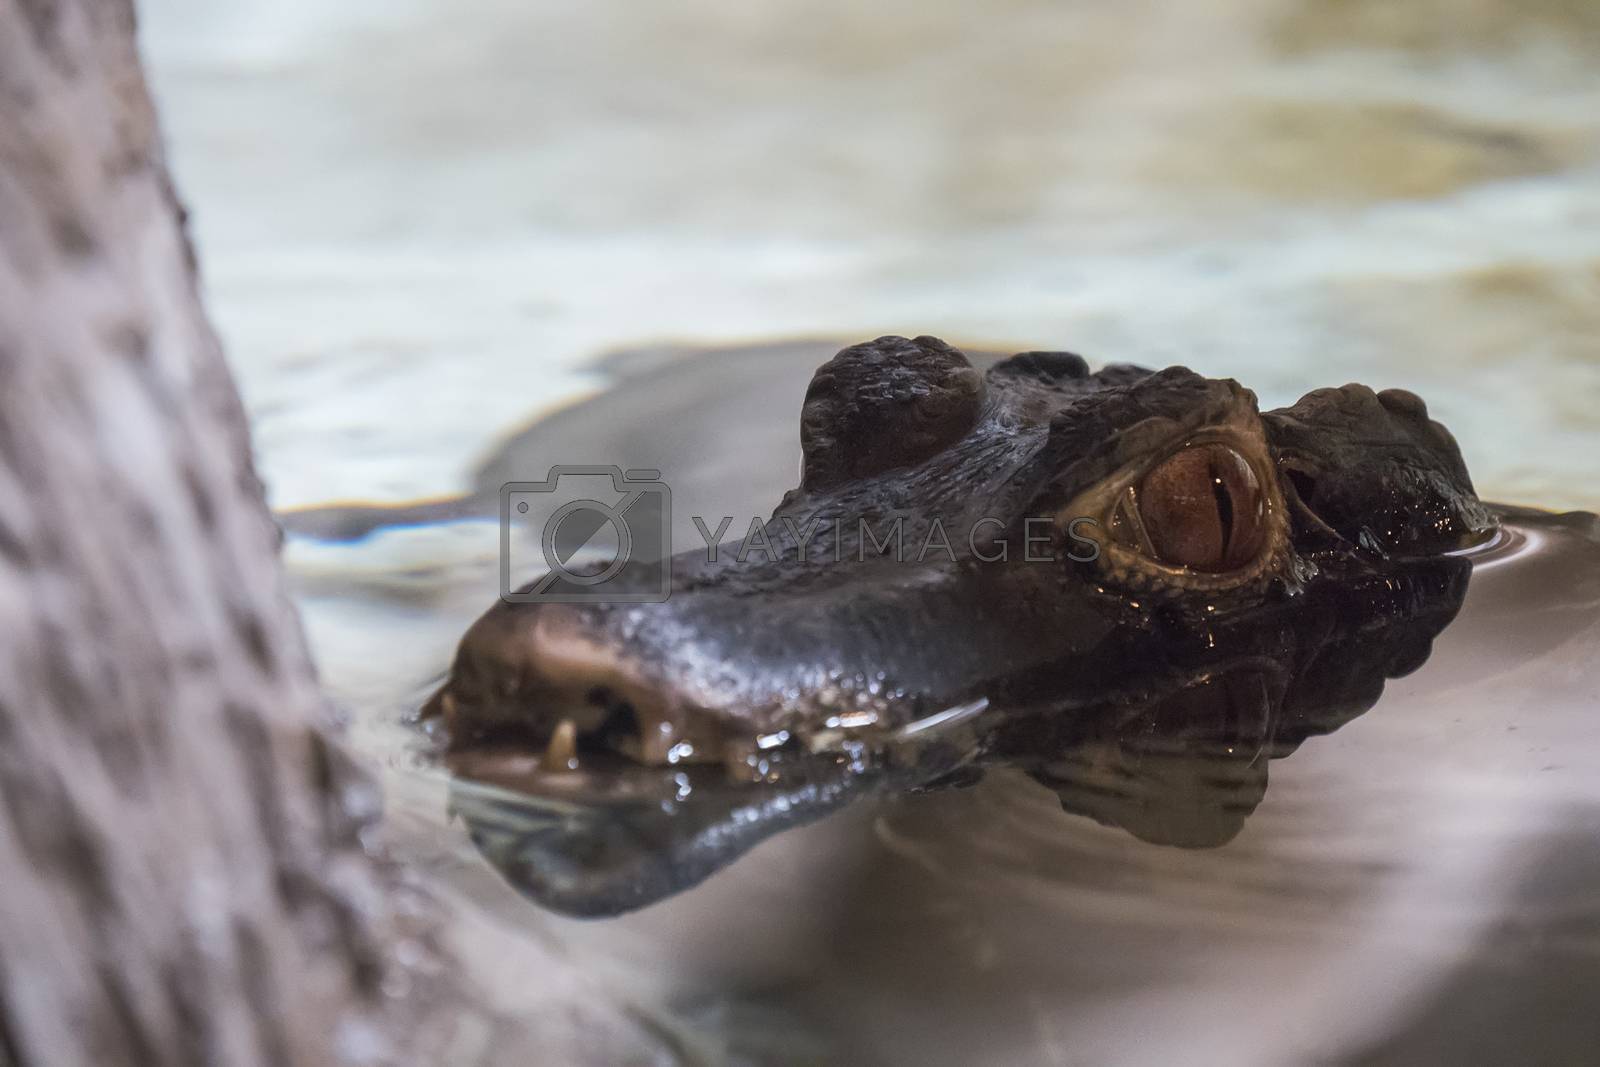 Royalty free image of Cuvier's caiman head protruding from the water by max8xam